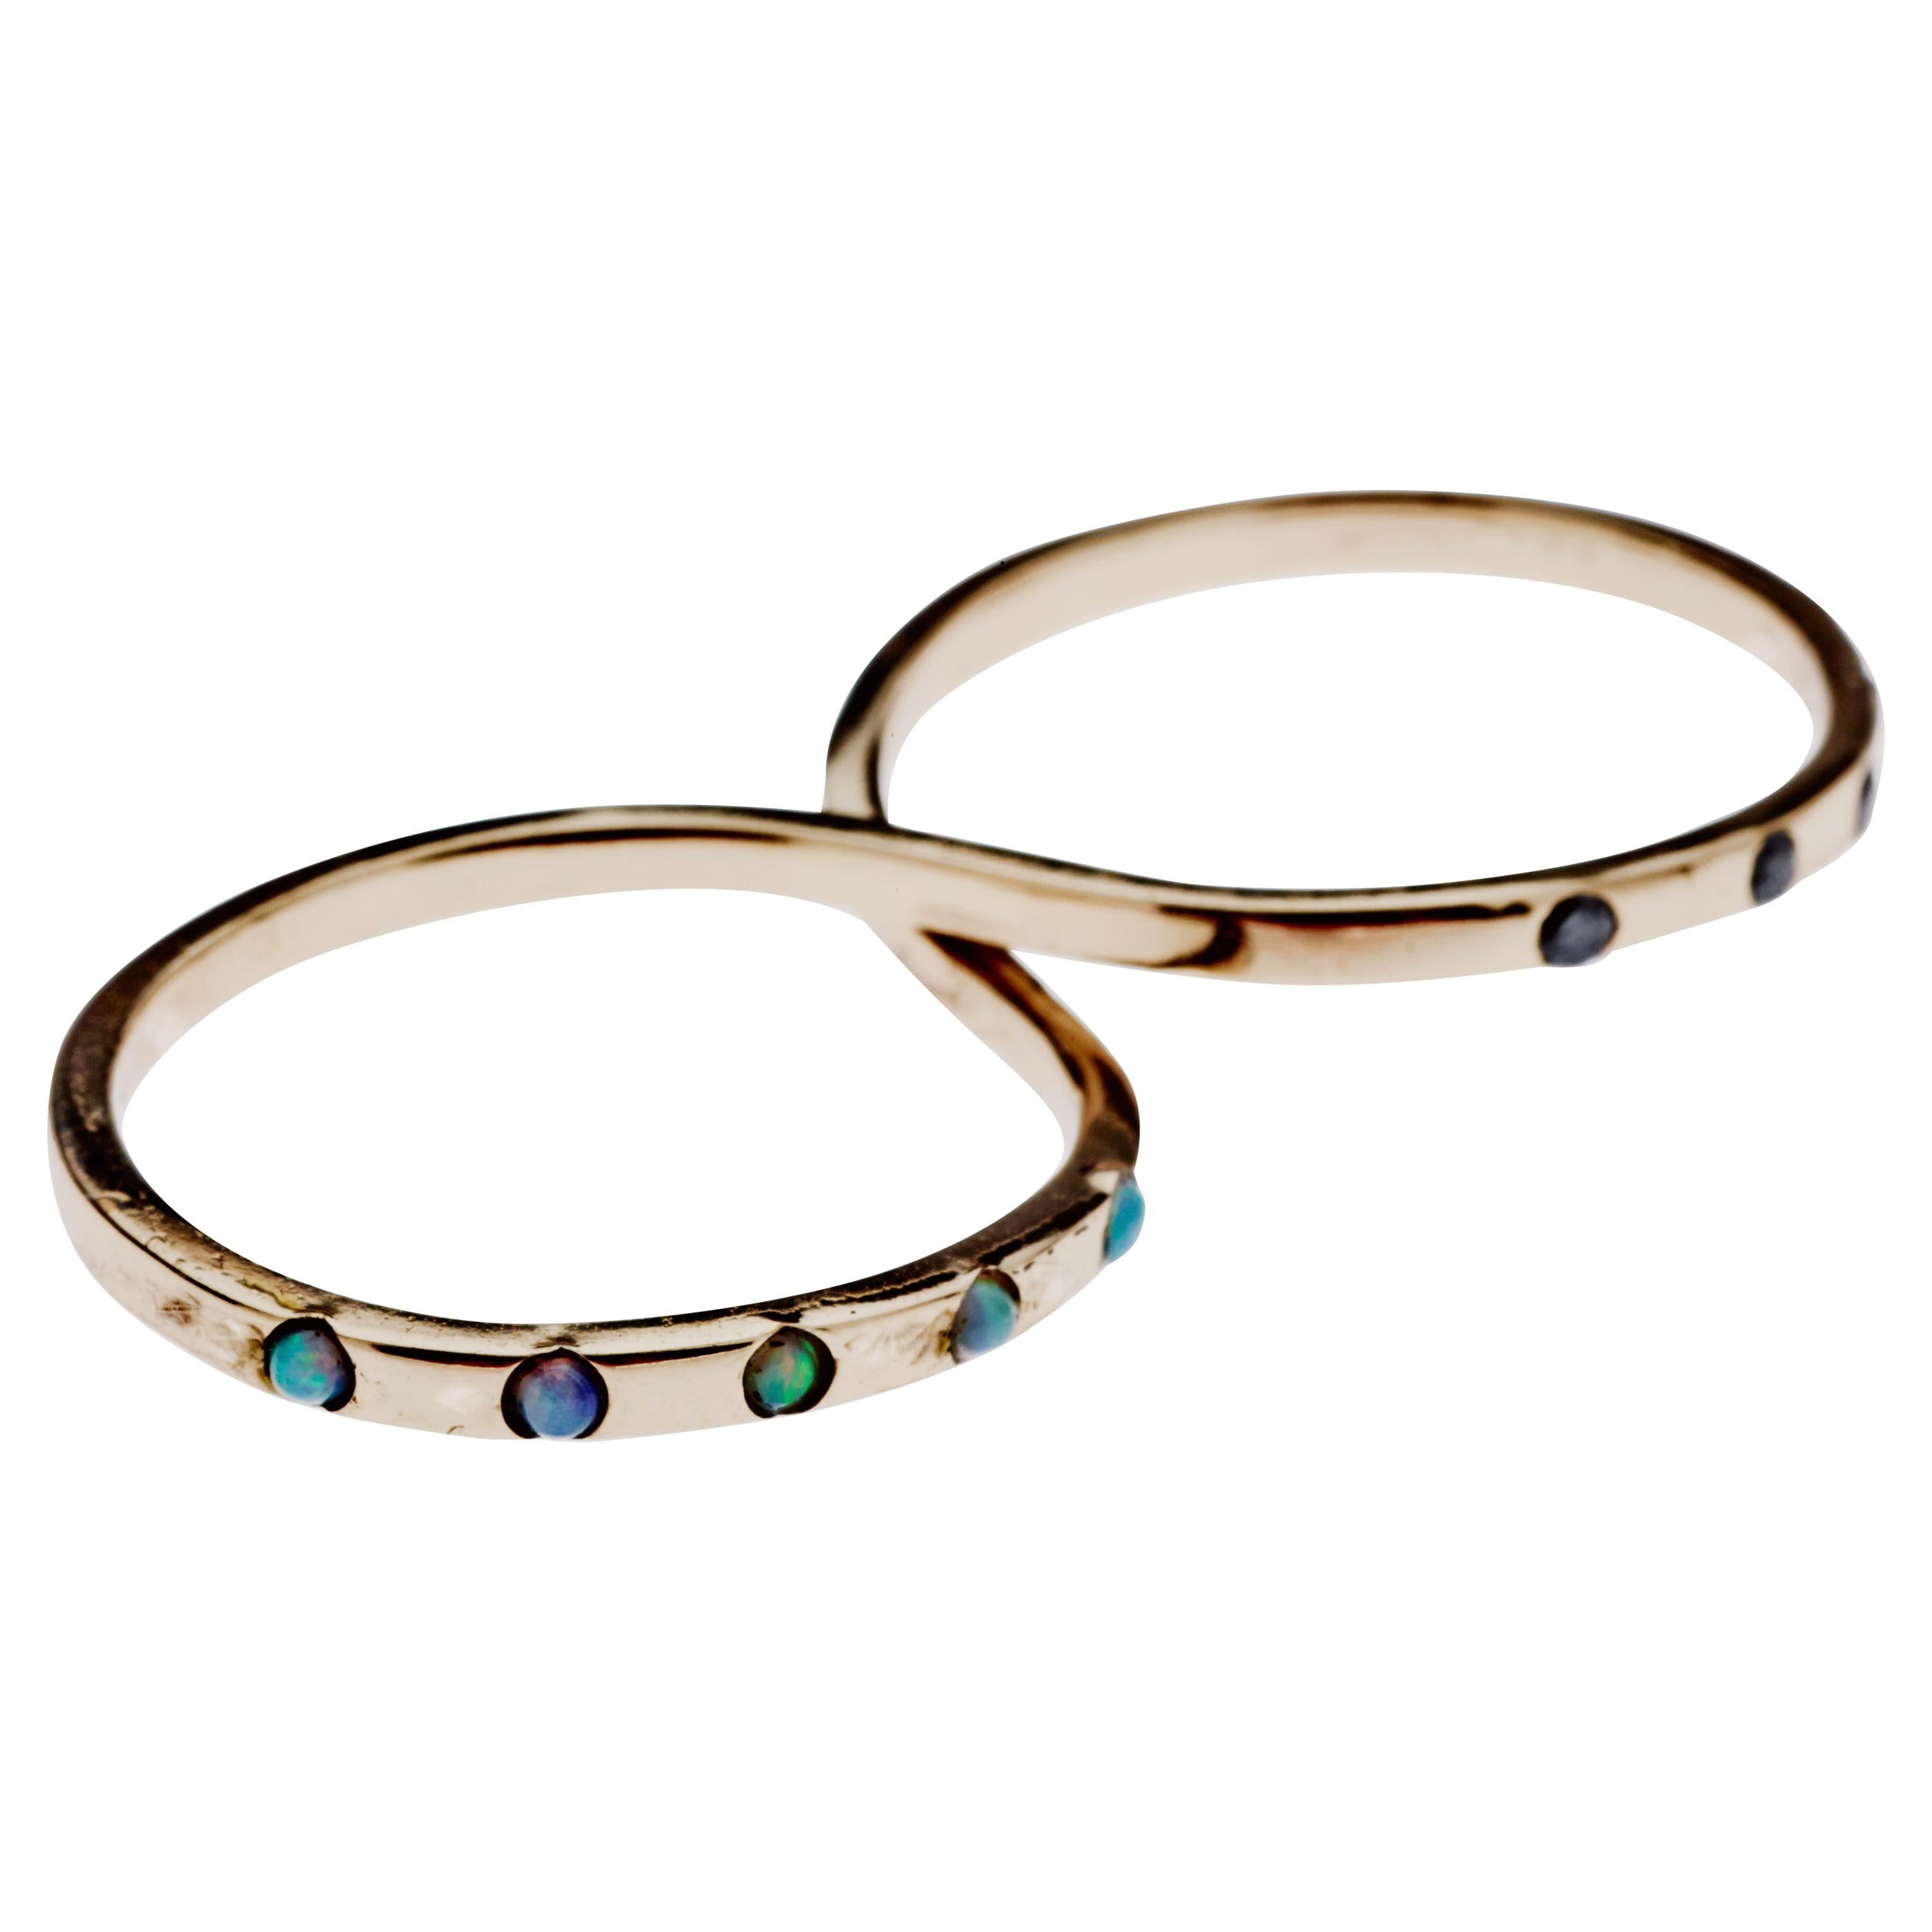 Opal Black Diamond Gold Two Finger Ring J Dauphin

J DAUPHIN Made in 14k Gold
A Fashion ring which symbolize love and infinity

This piece comes in 3 sizes  (Size Us 5 and 6) (Size Us 6 and 7) (Size Us 7 and 8)  (The rings has two loops which goes